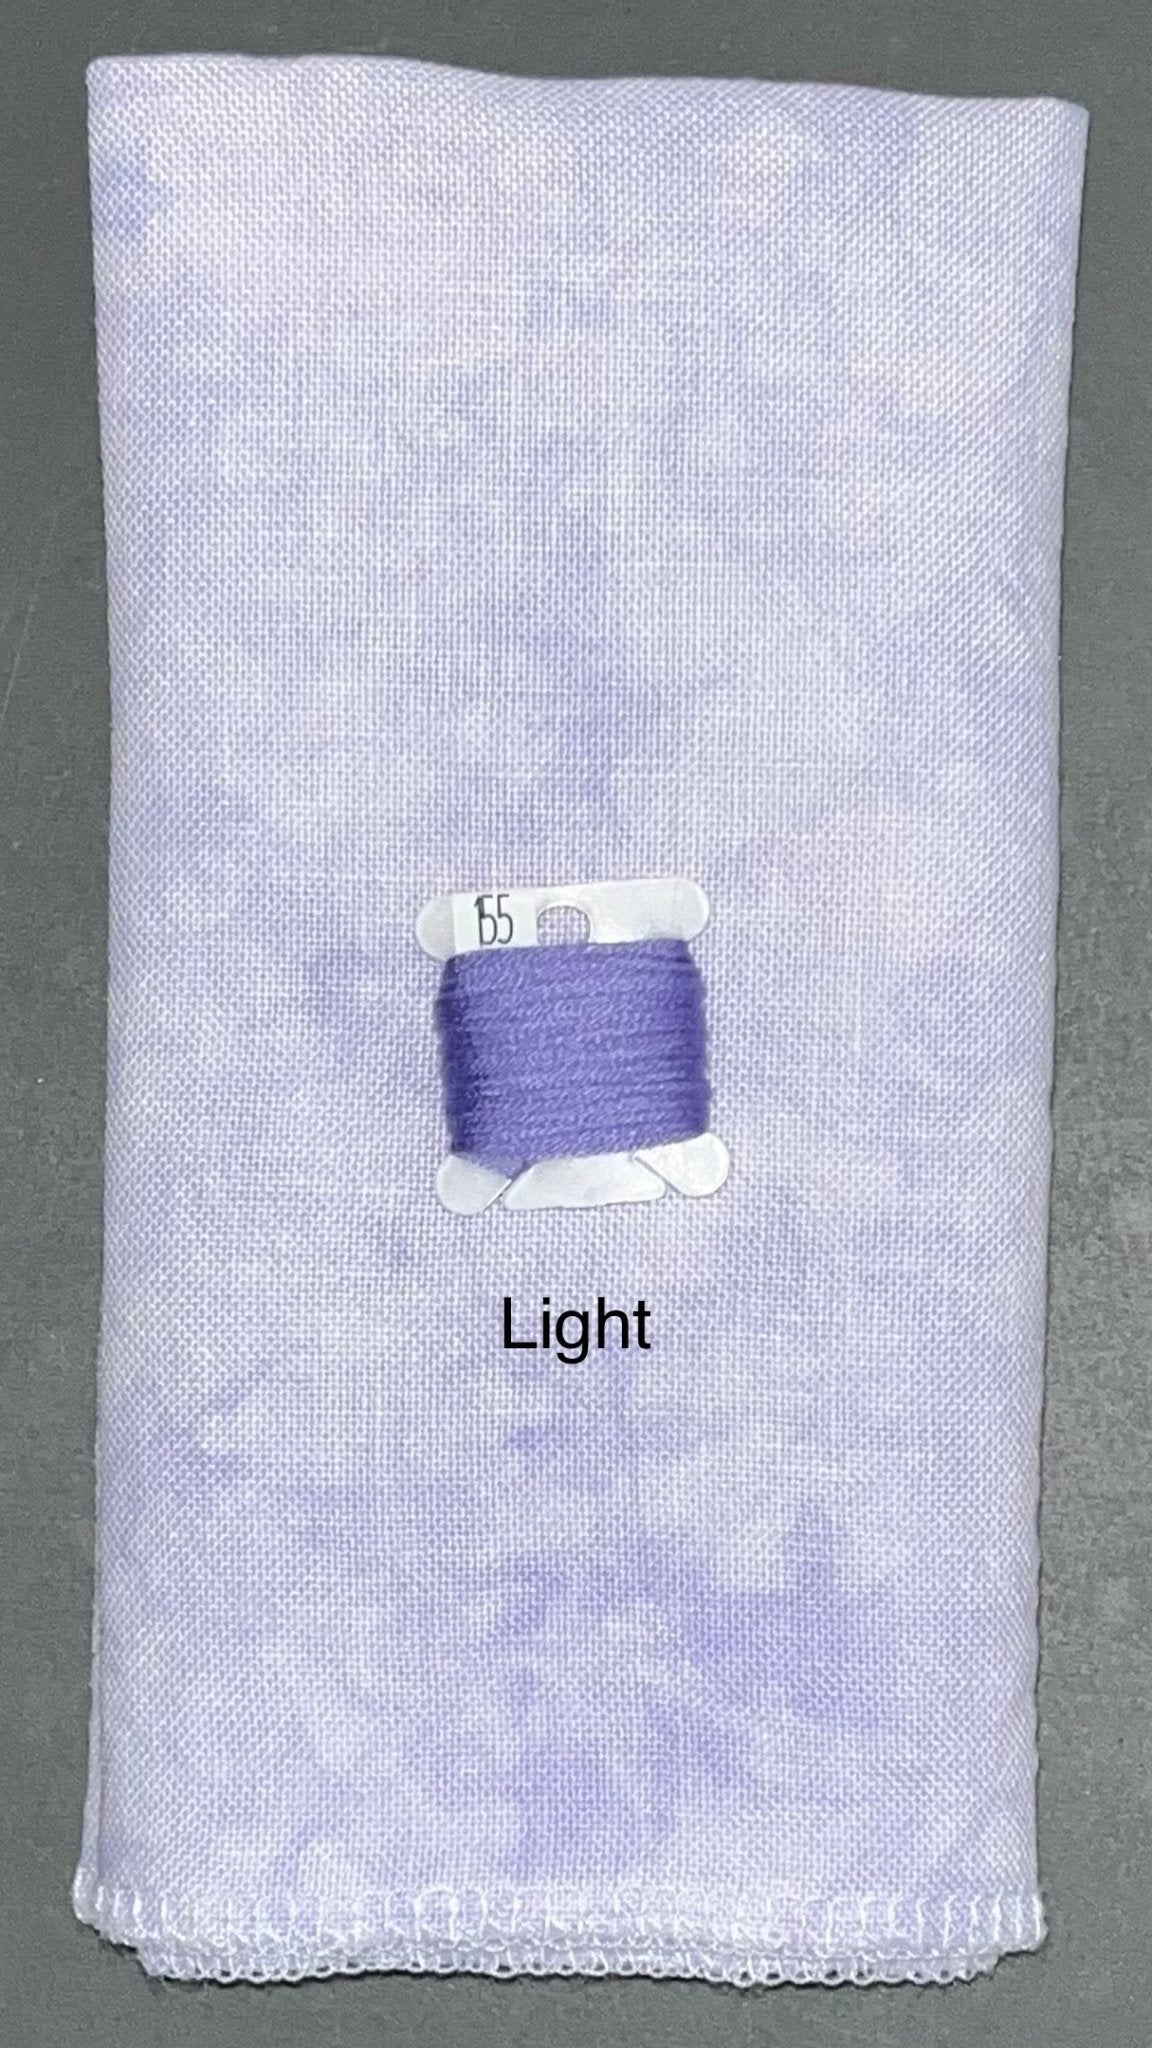 Linen - Lilac - Dyeing for Cross Stitch